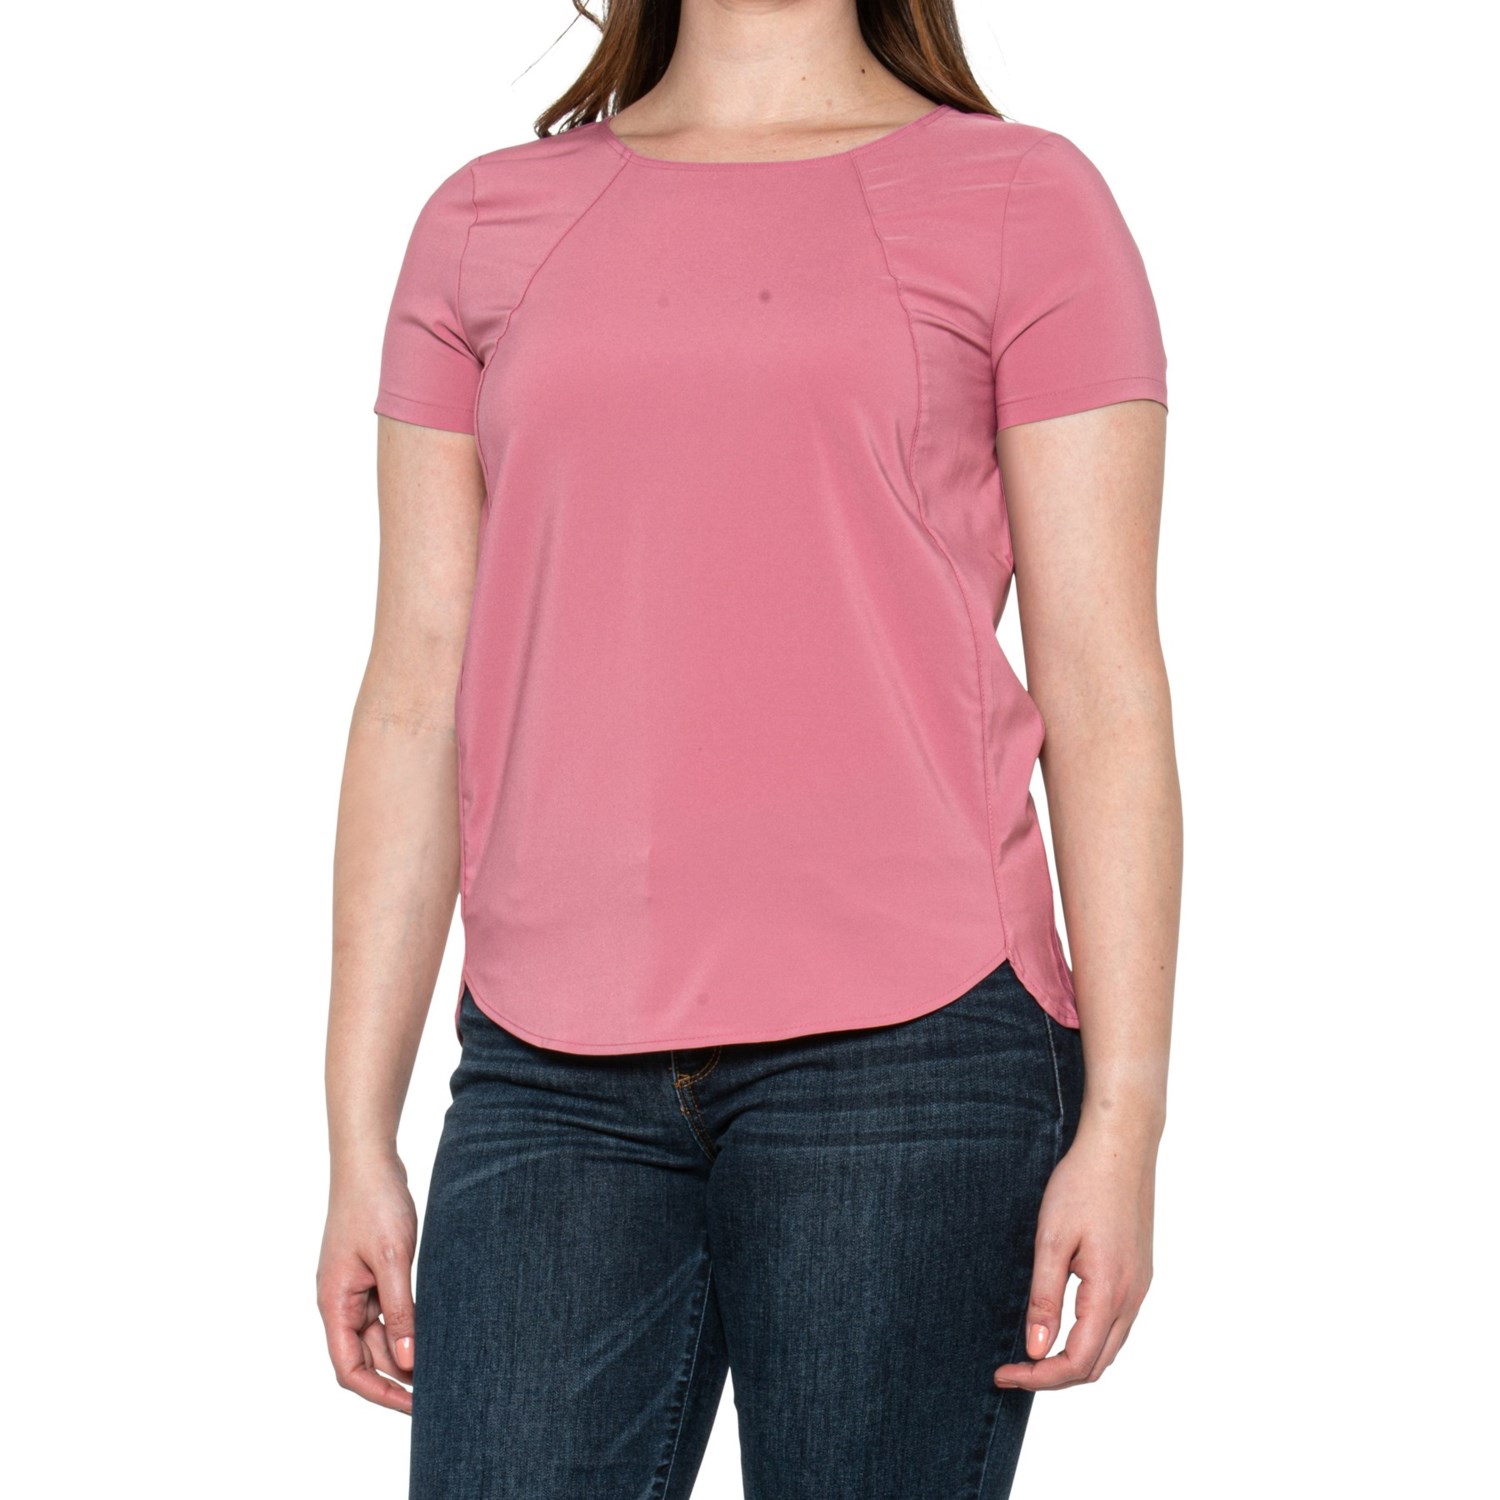 Willow Blossom Solid Active T-Shirt - Short Sleeve - Save 58%